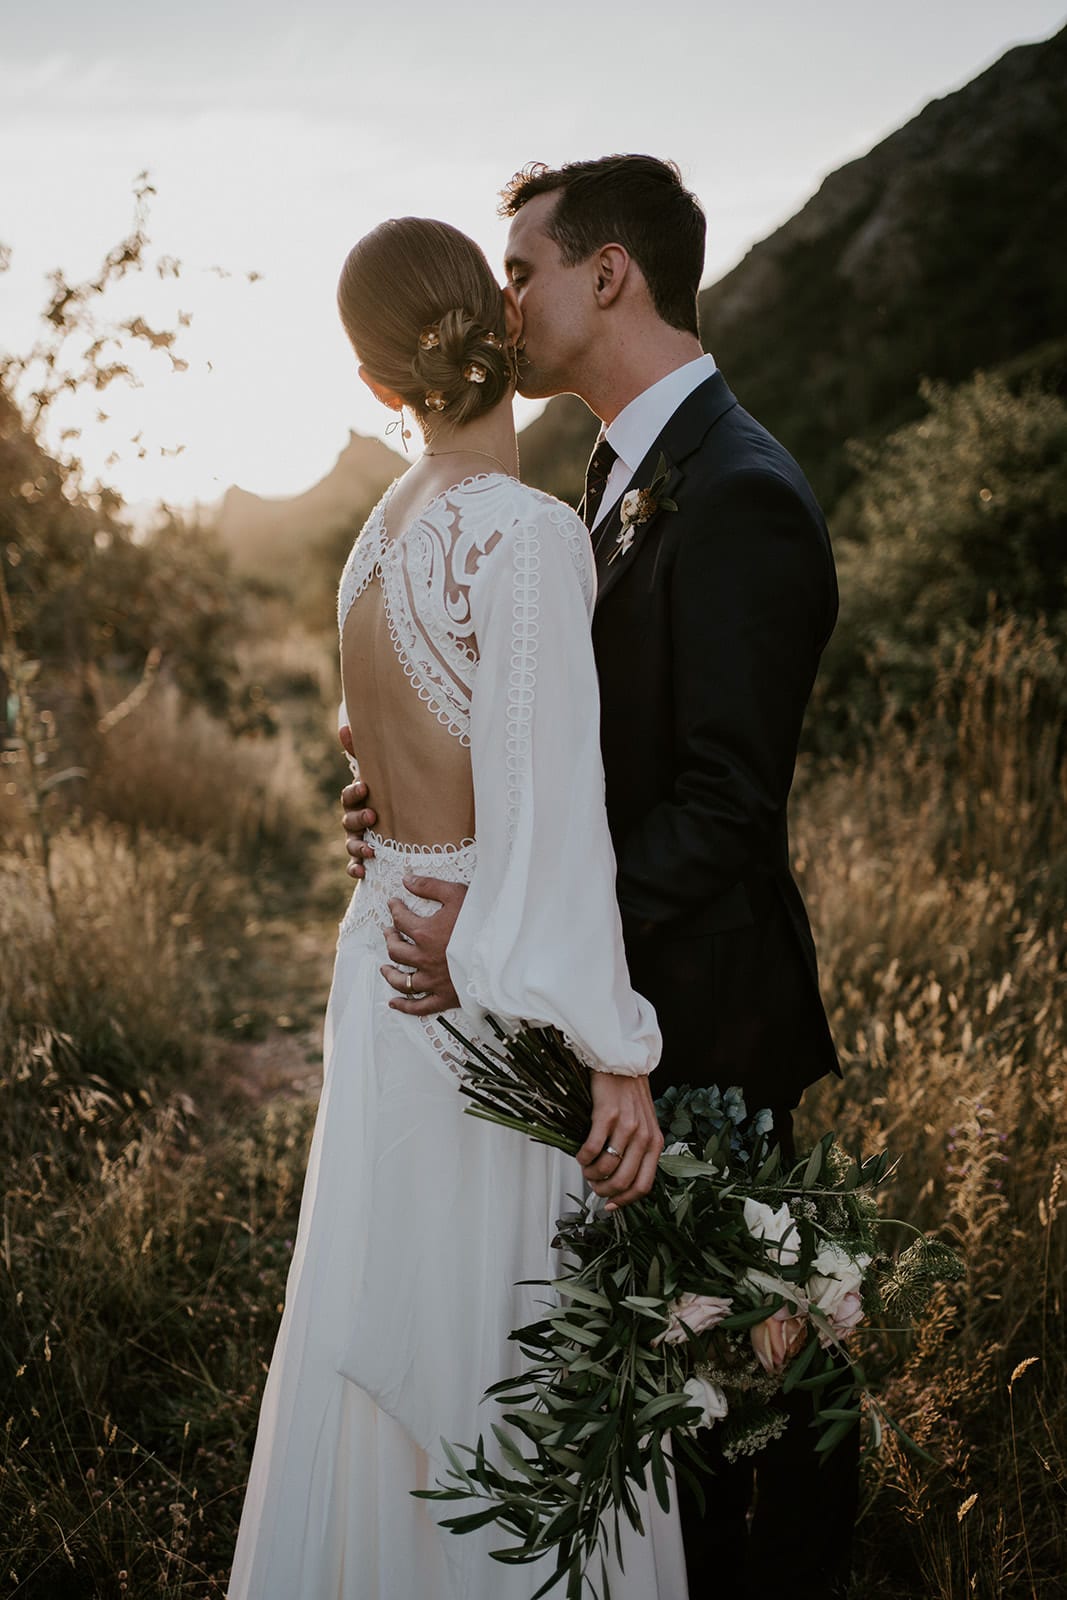 Mia & James \ Floral Fantasies captured by Carla Mitchell | Real ...